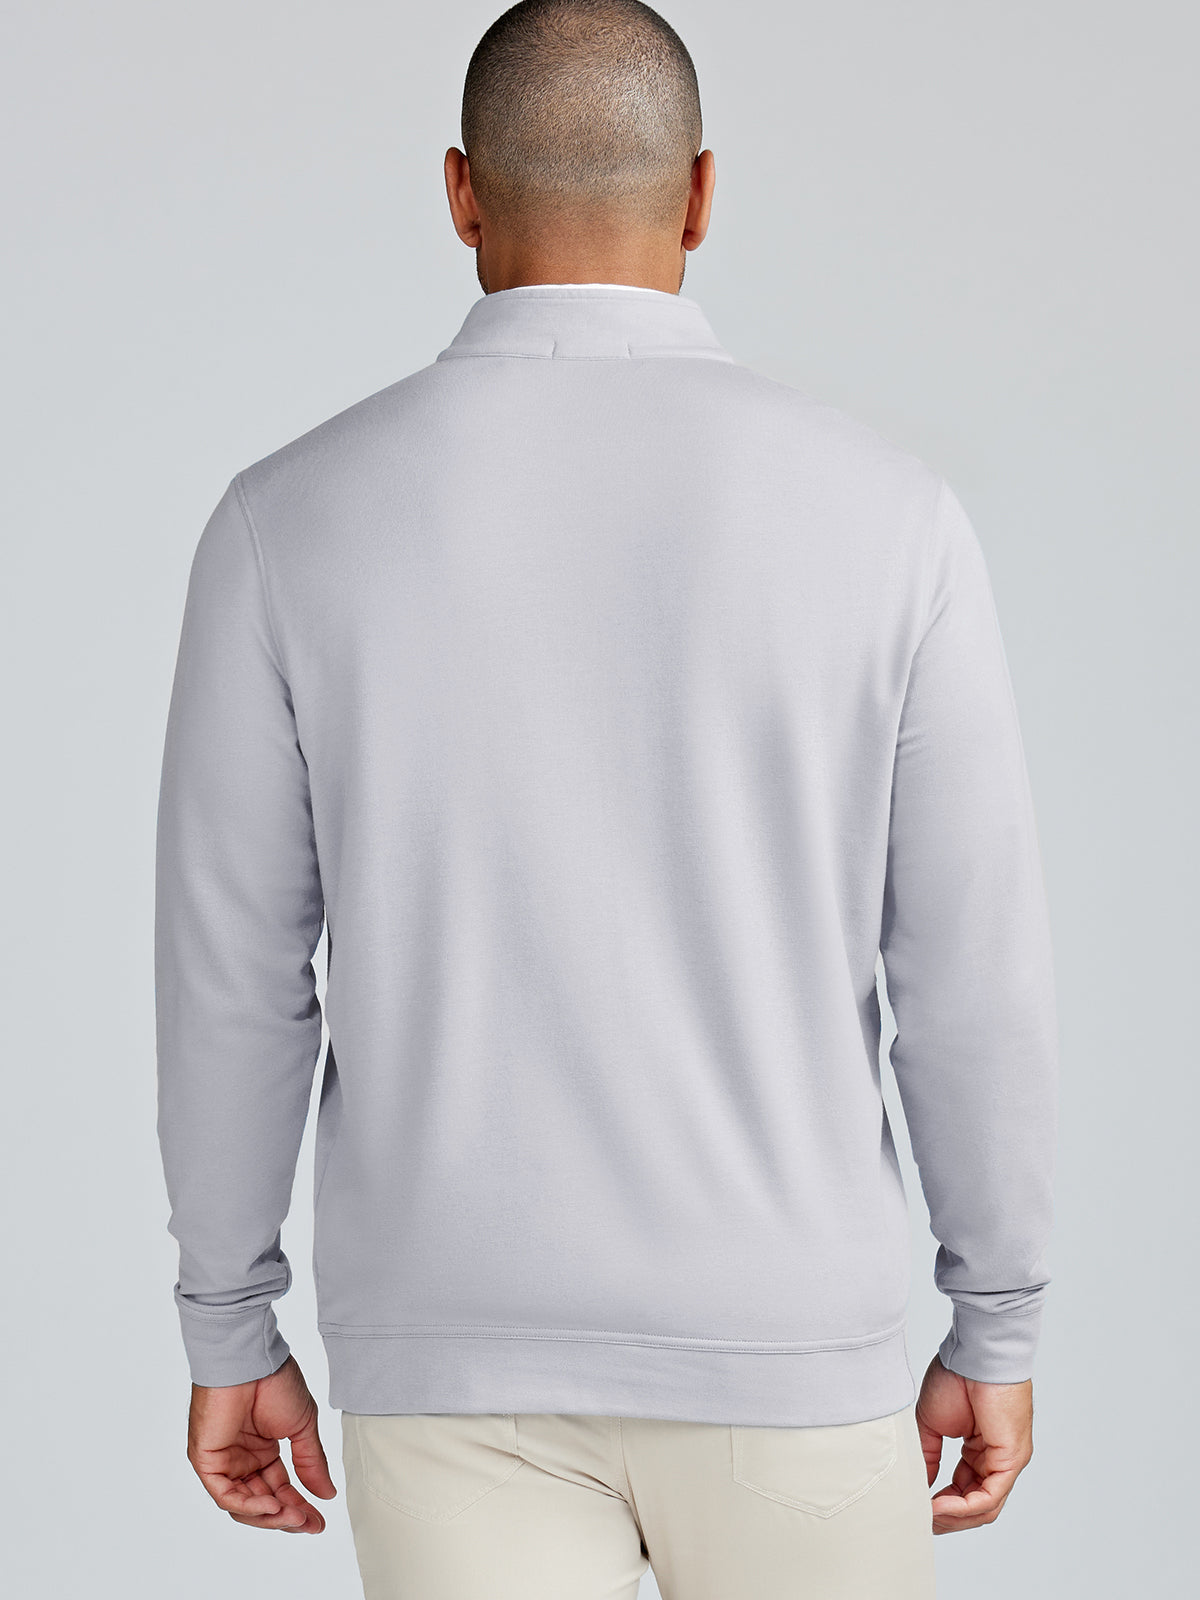 Cloud French Terry Quarter Zip - Yale - tasc Performance (Alloy)